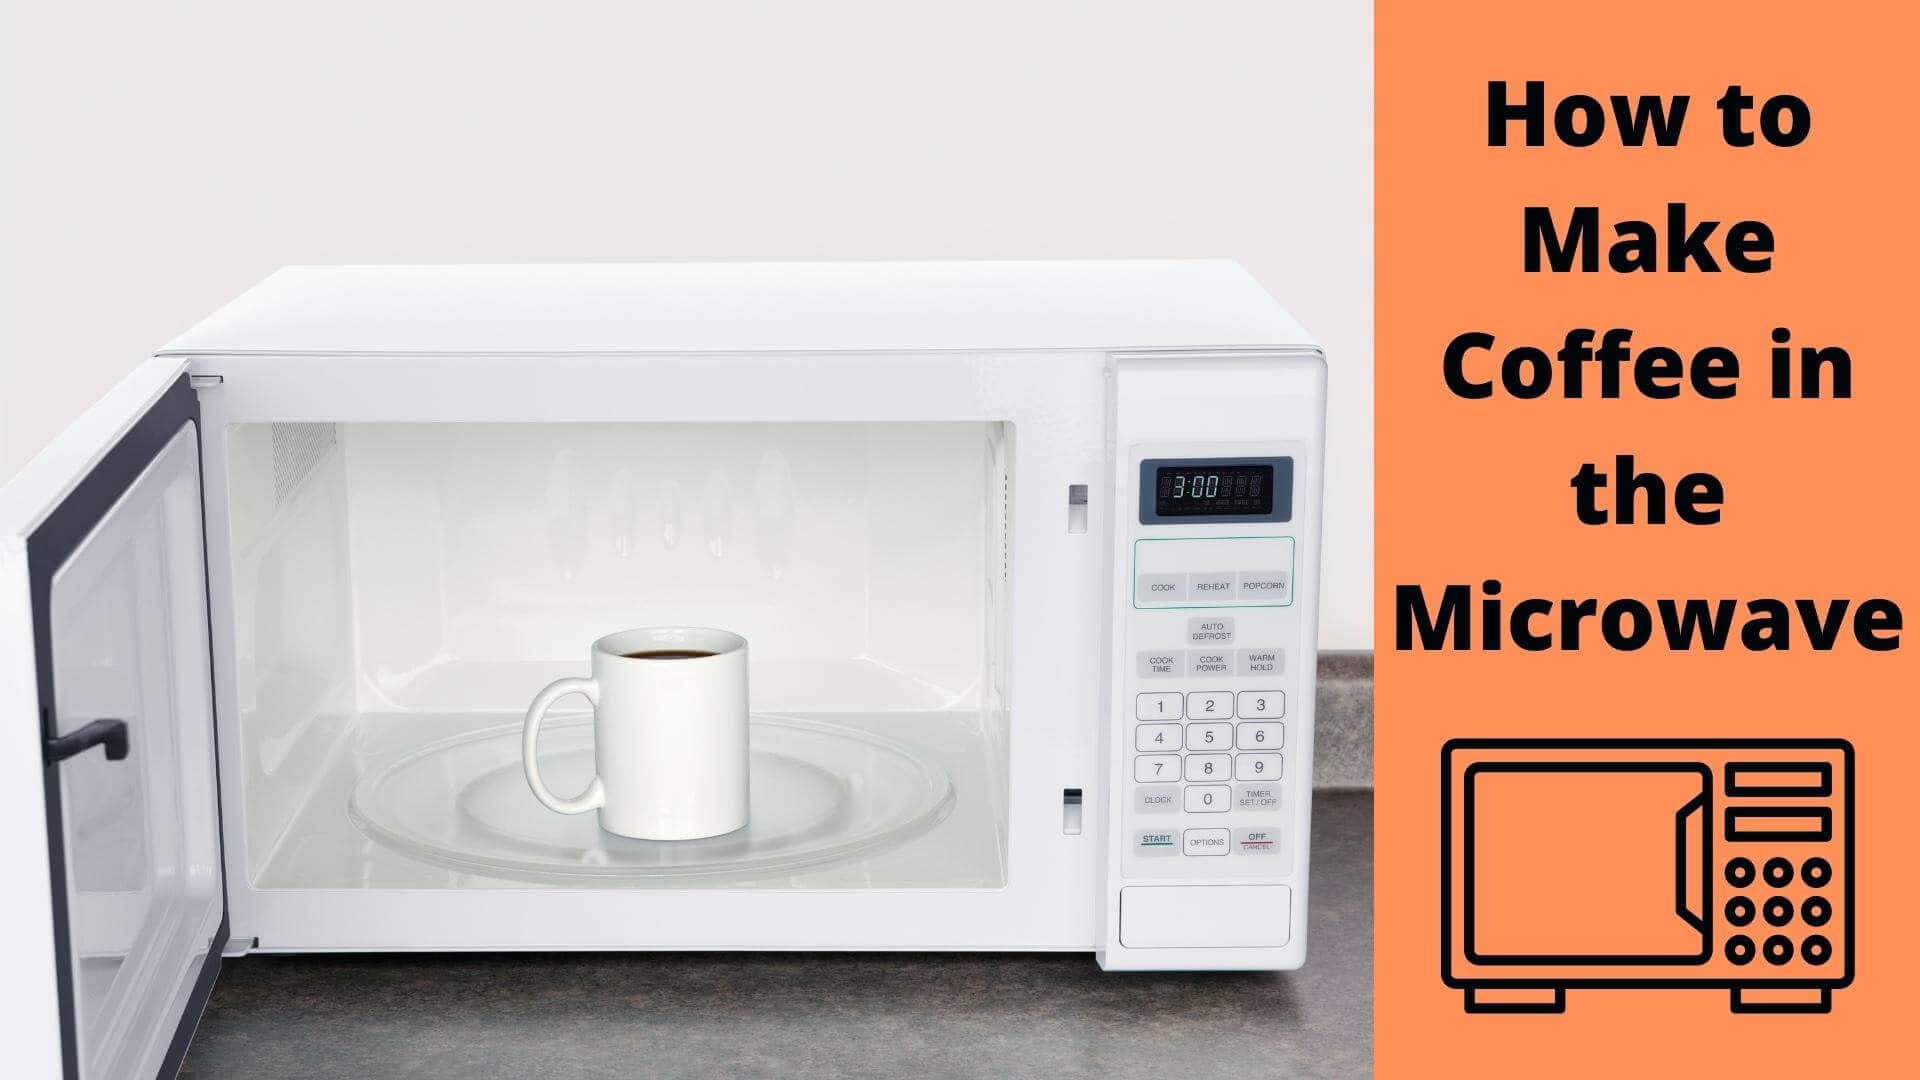 How to Make Coffee in the Microwave